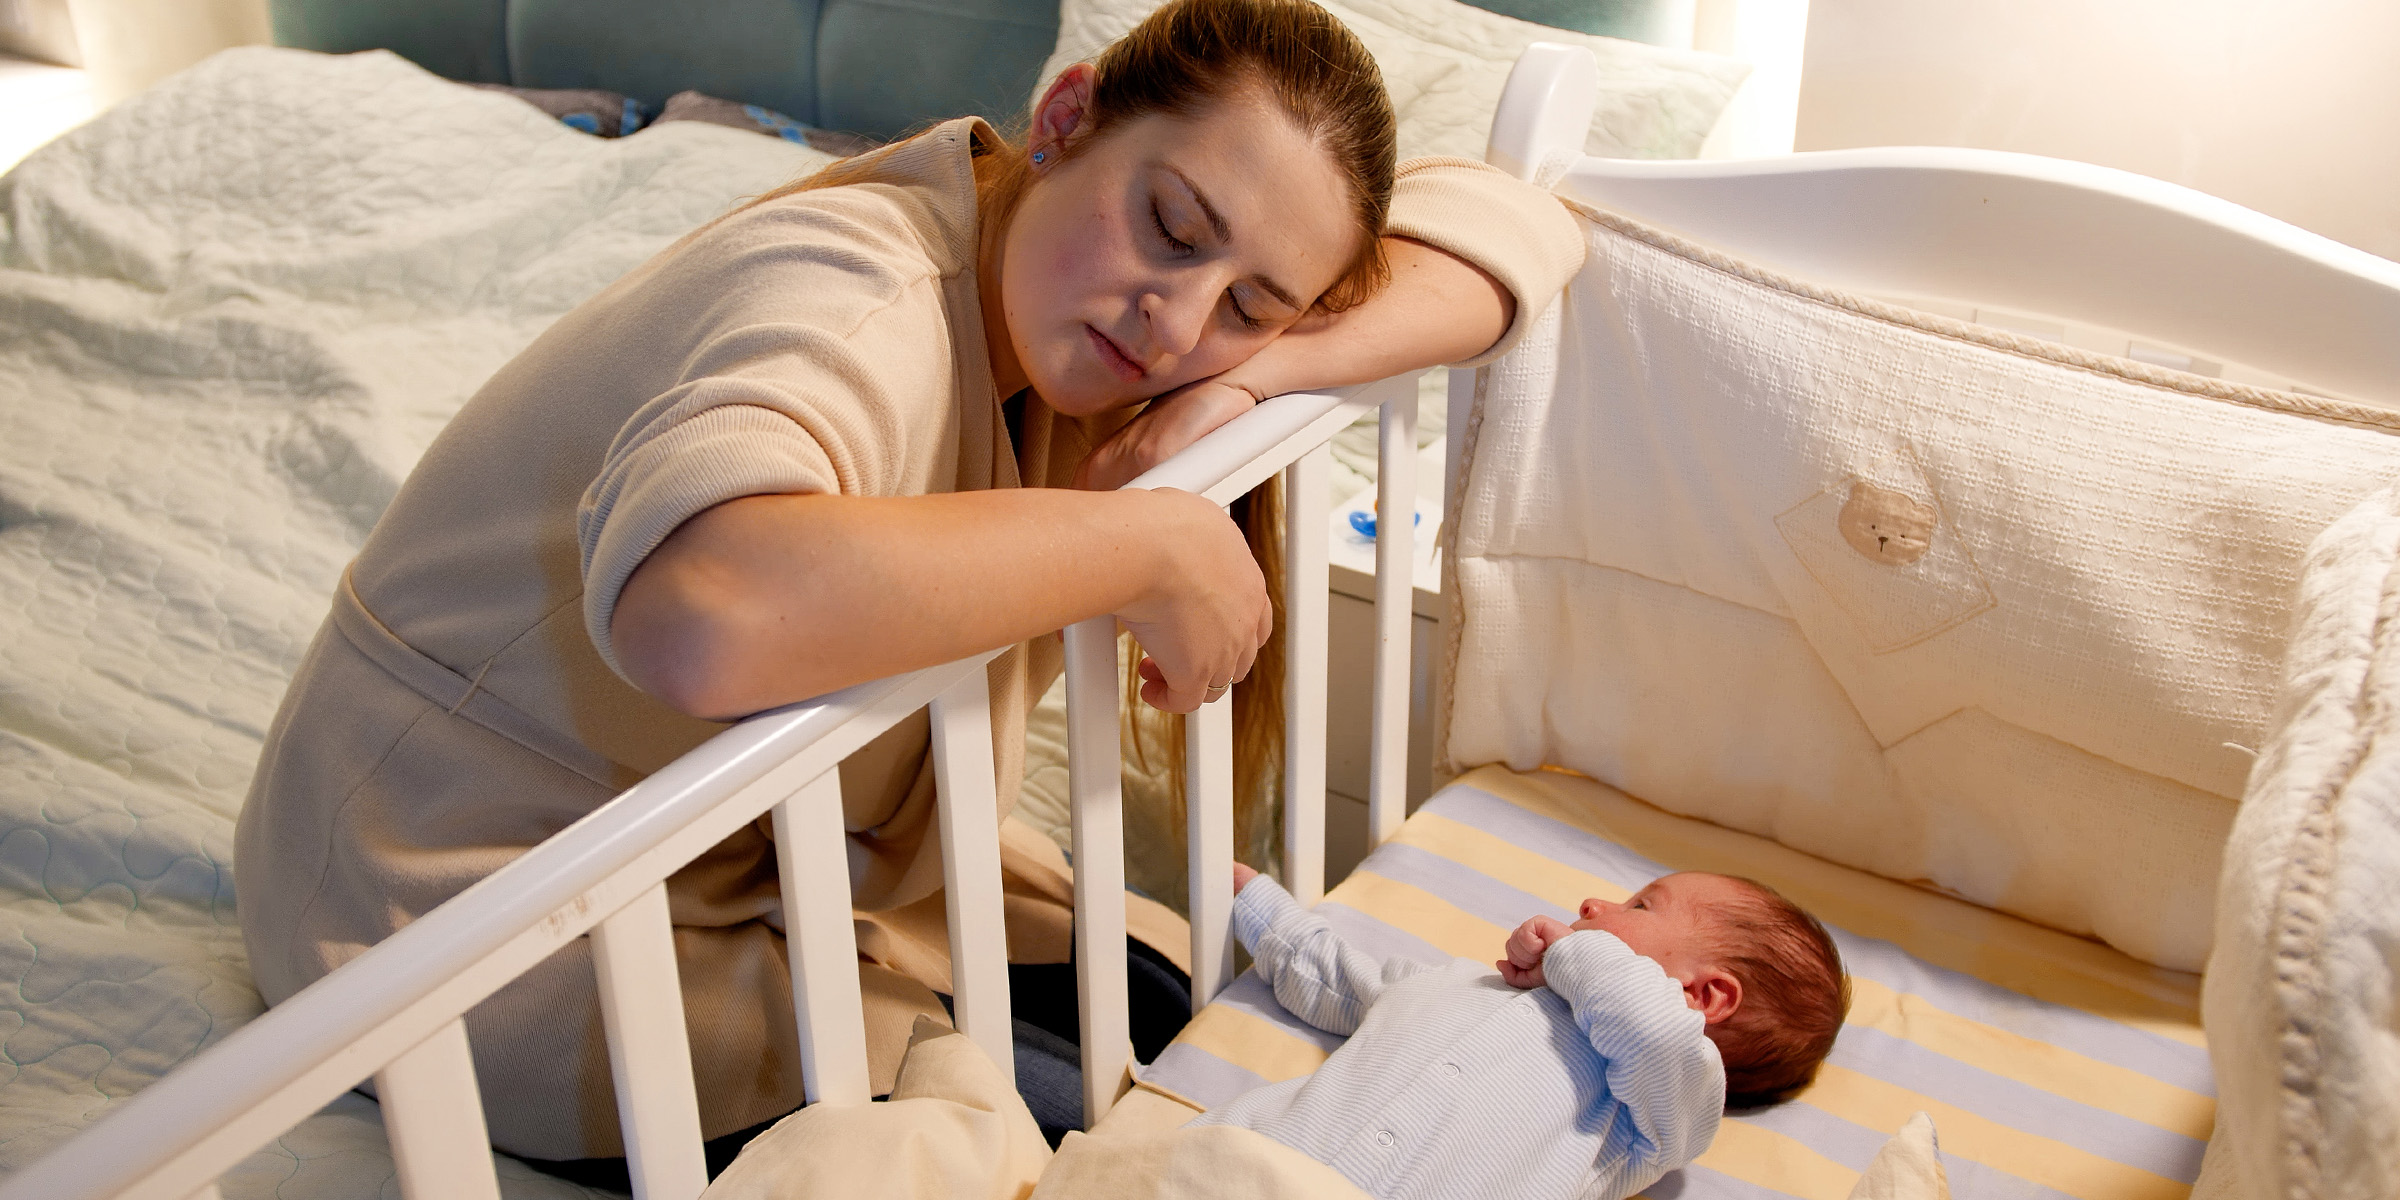 A tired mom and newborn | Source: Shutterstock